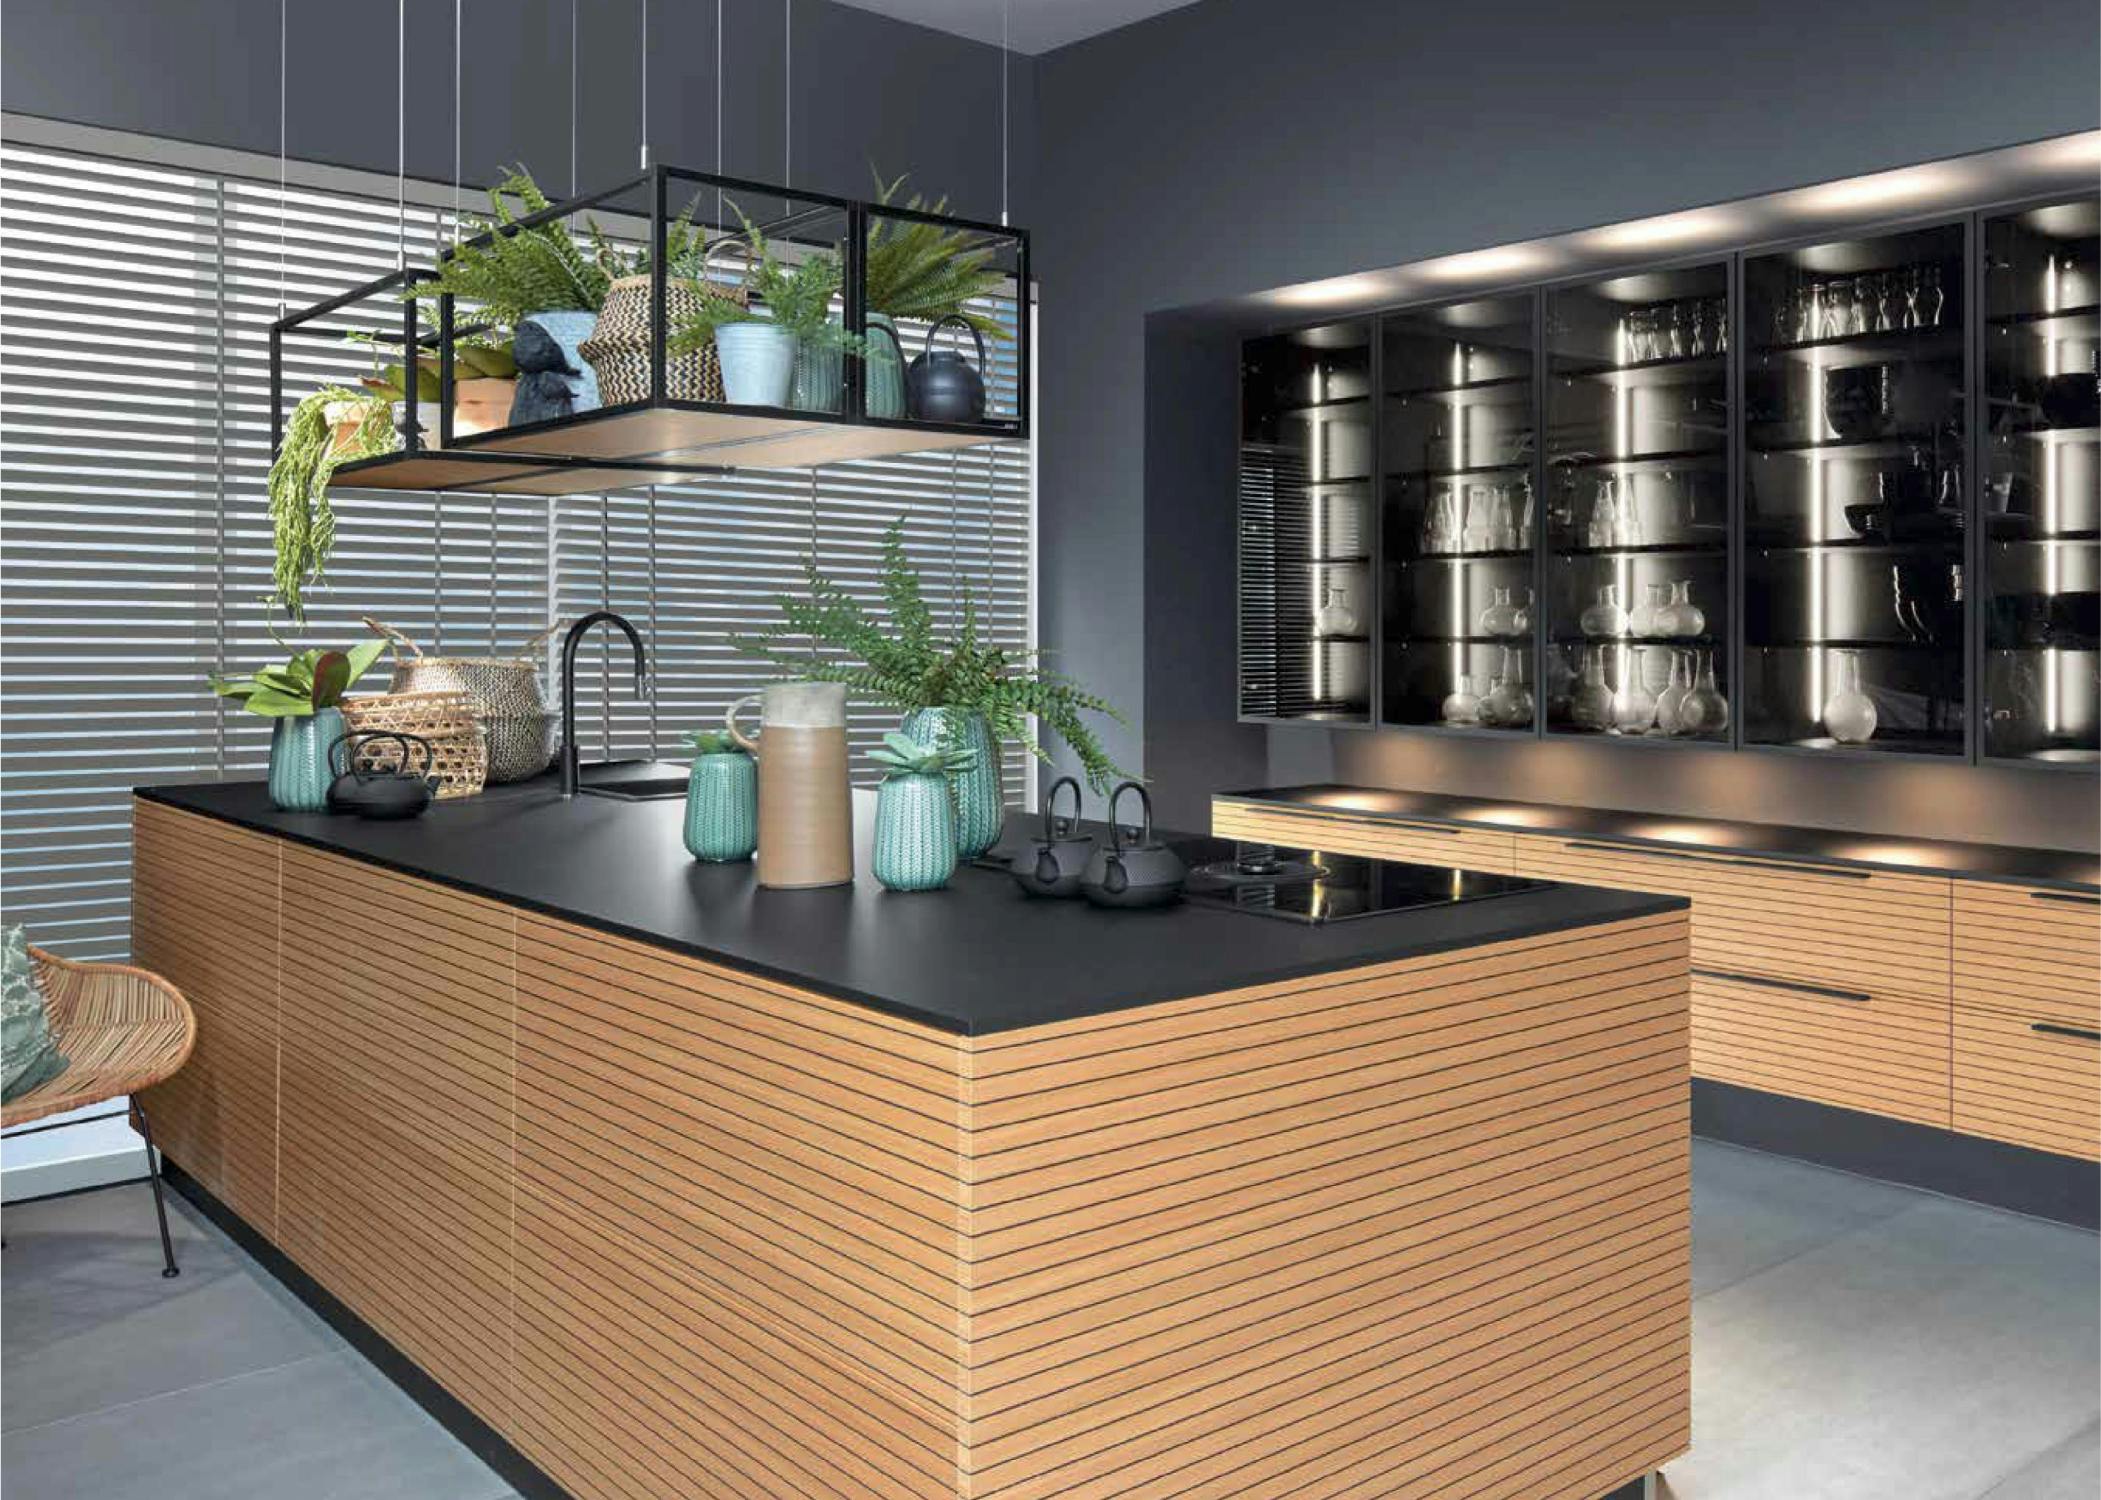 modern kitchen design with space grey wood and marbel with lights and elegant design with a tropical vibe and oven and microwave and big cabinet for glasses and plates